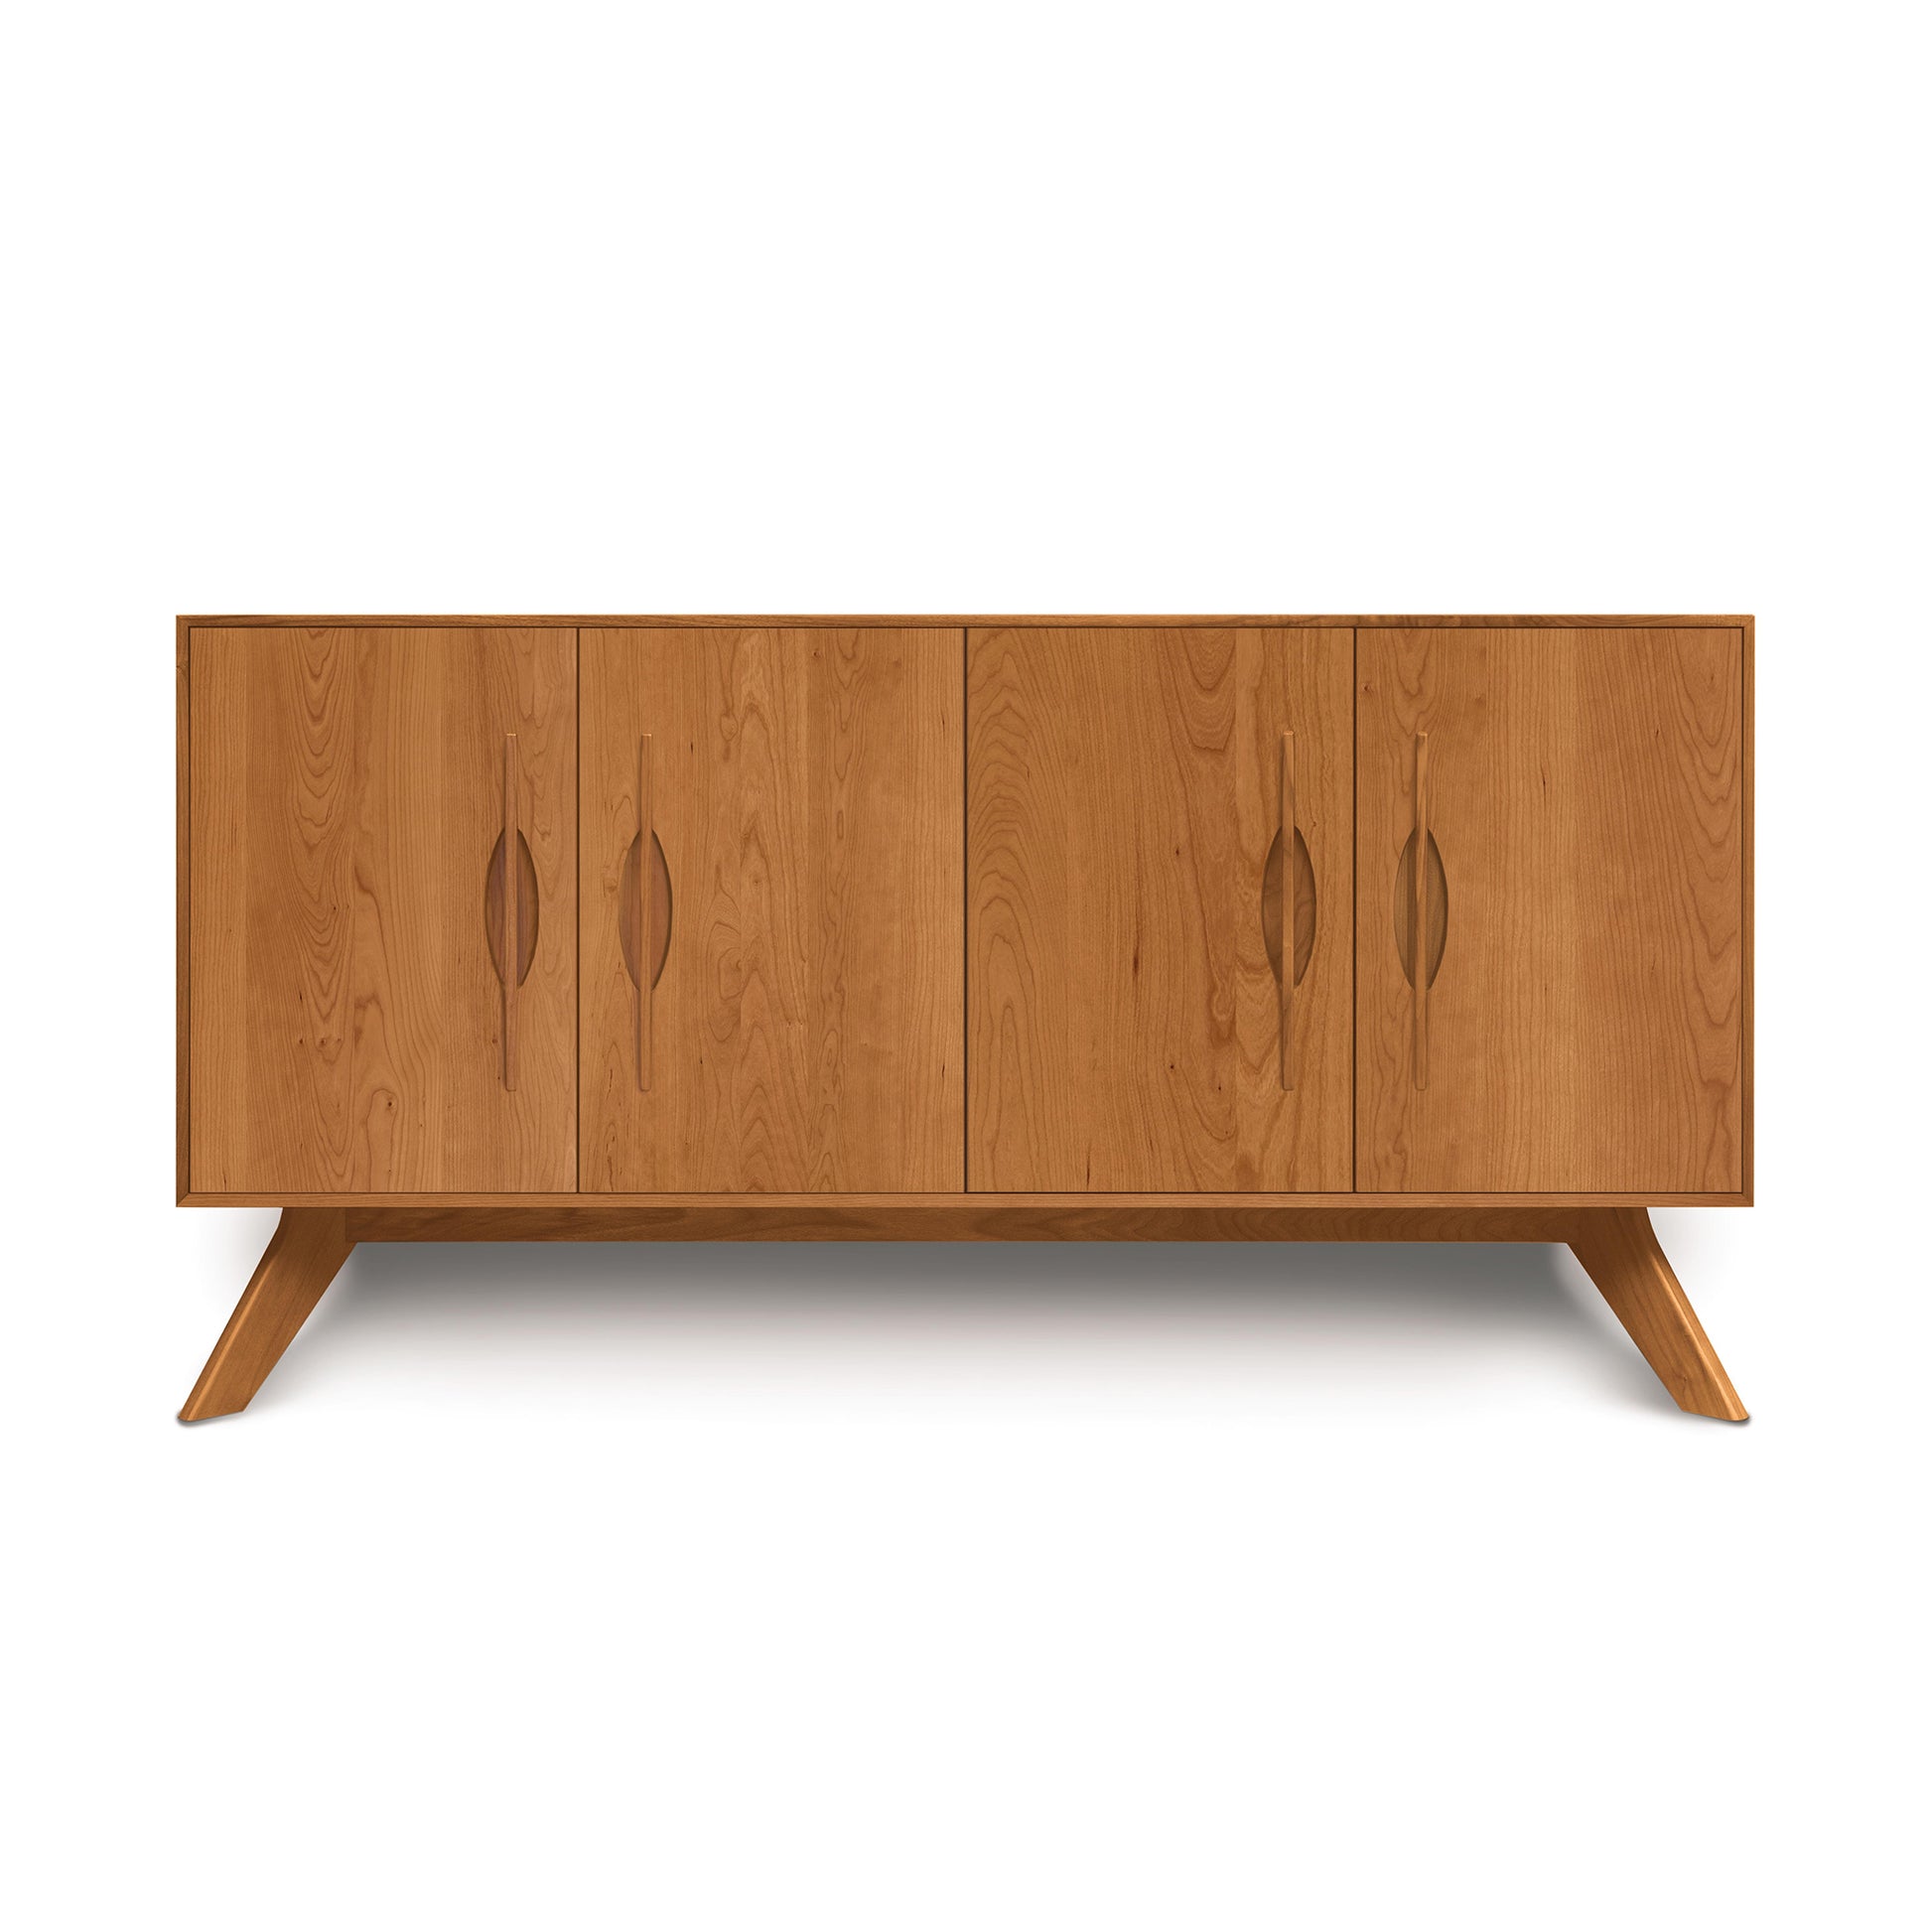 A wooden sideboard on a white background.